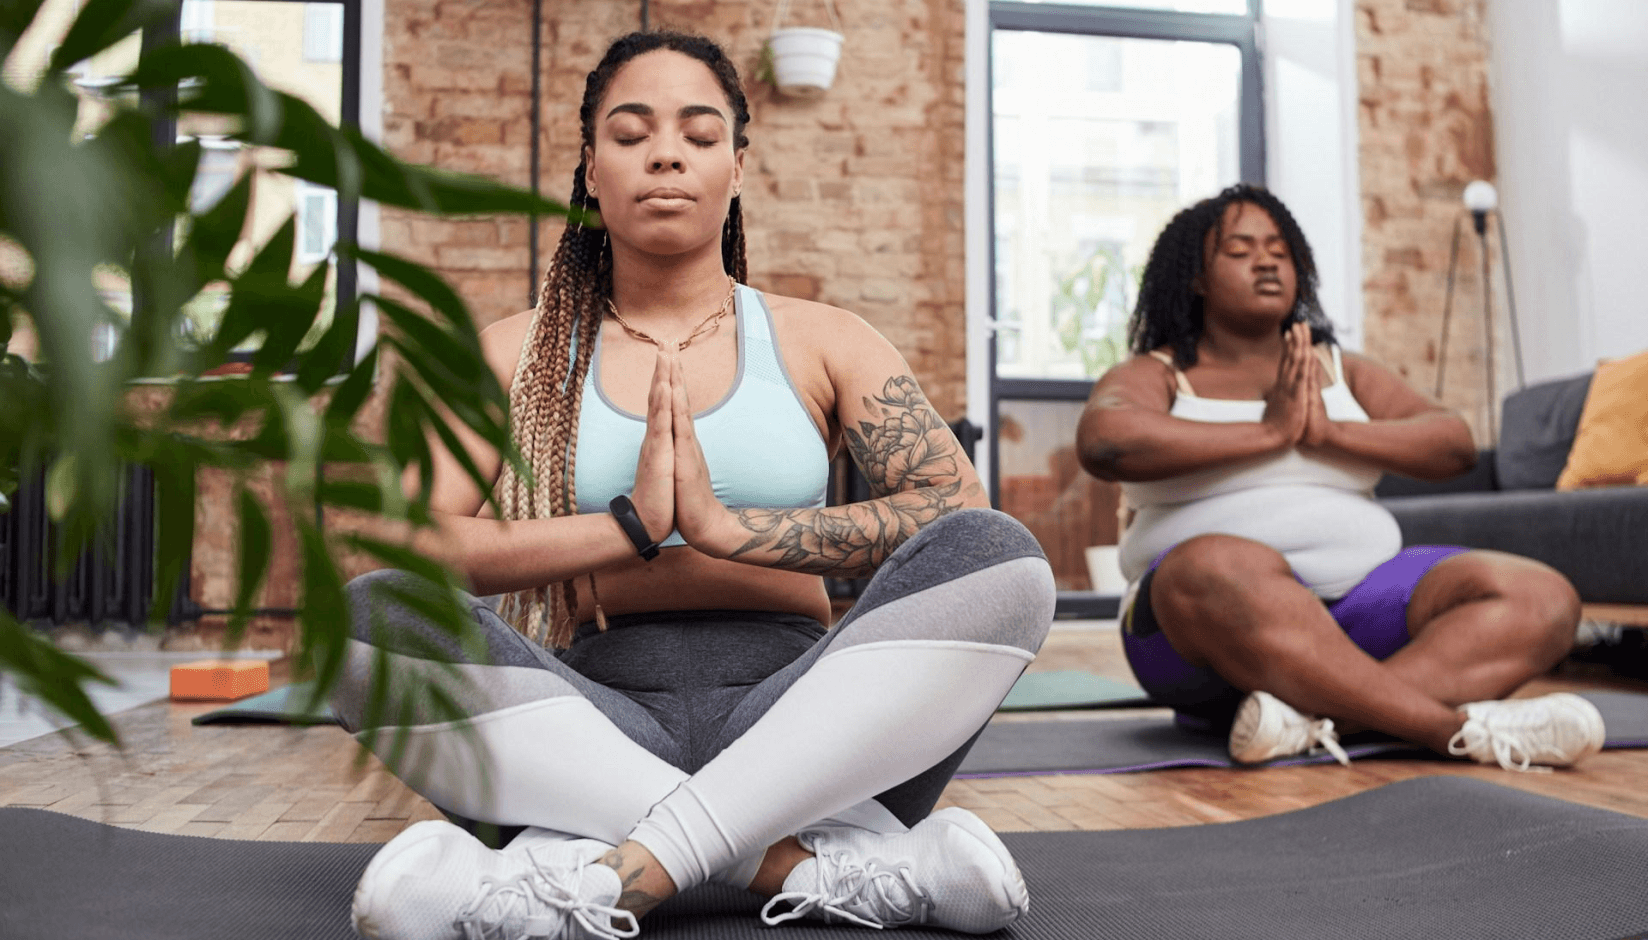 Wellness session at a women-centric coworking space